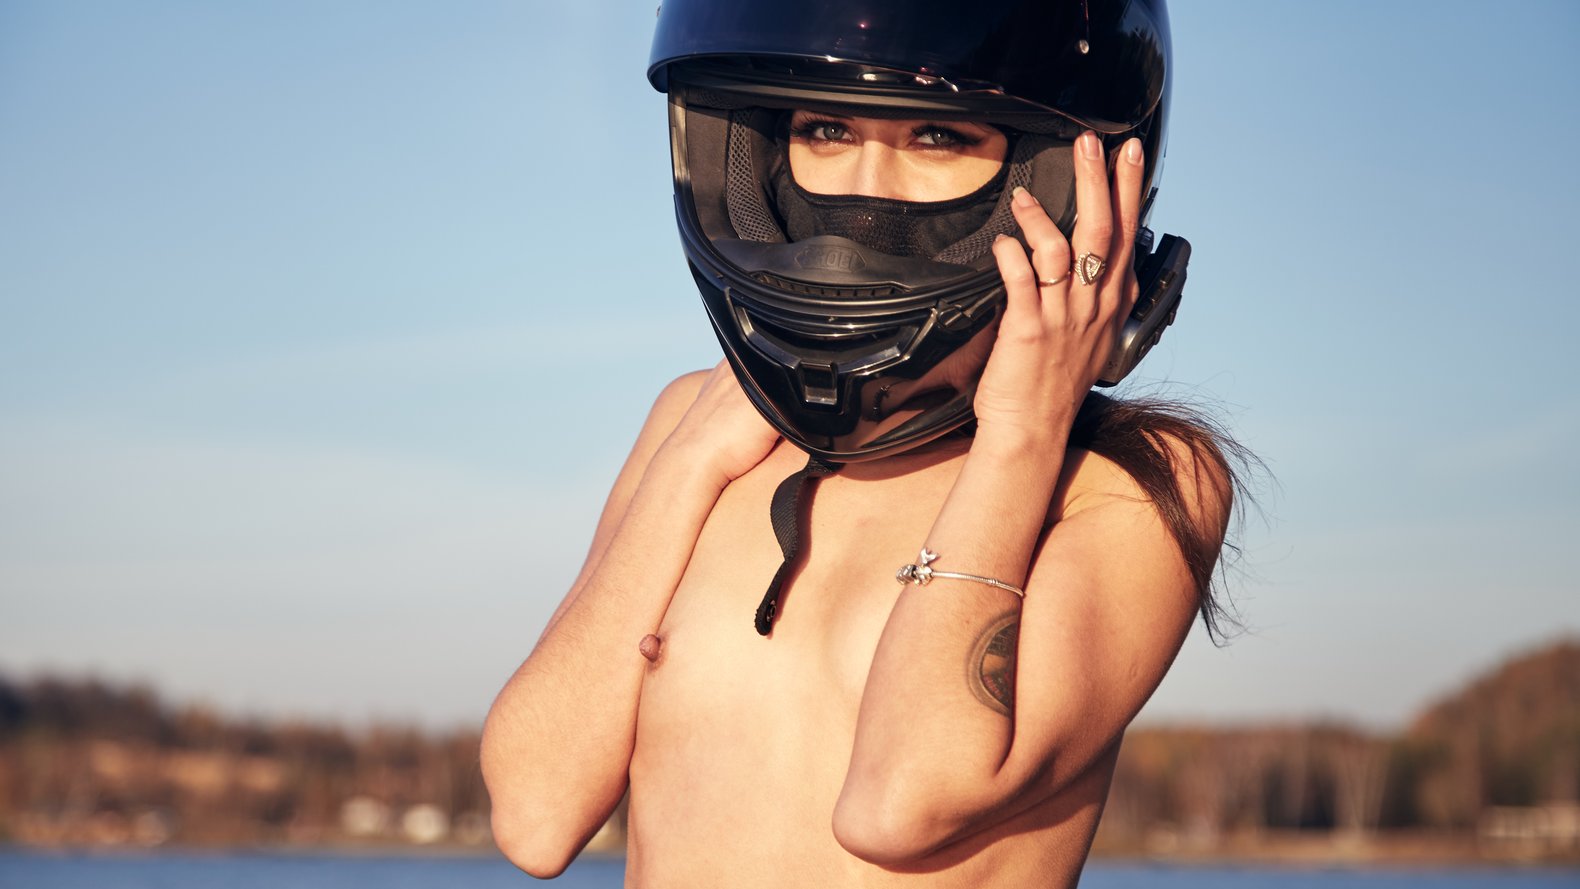 Topless flat chested girl in motorcycle helmet